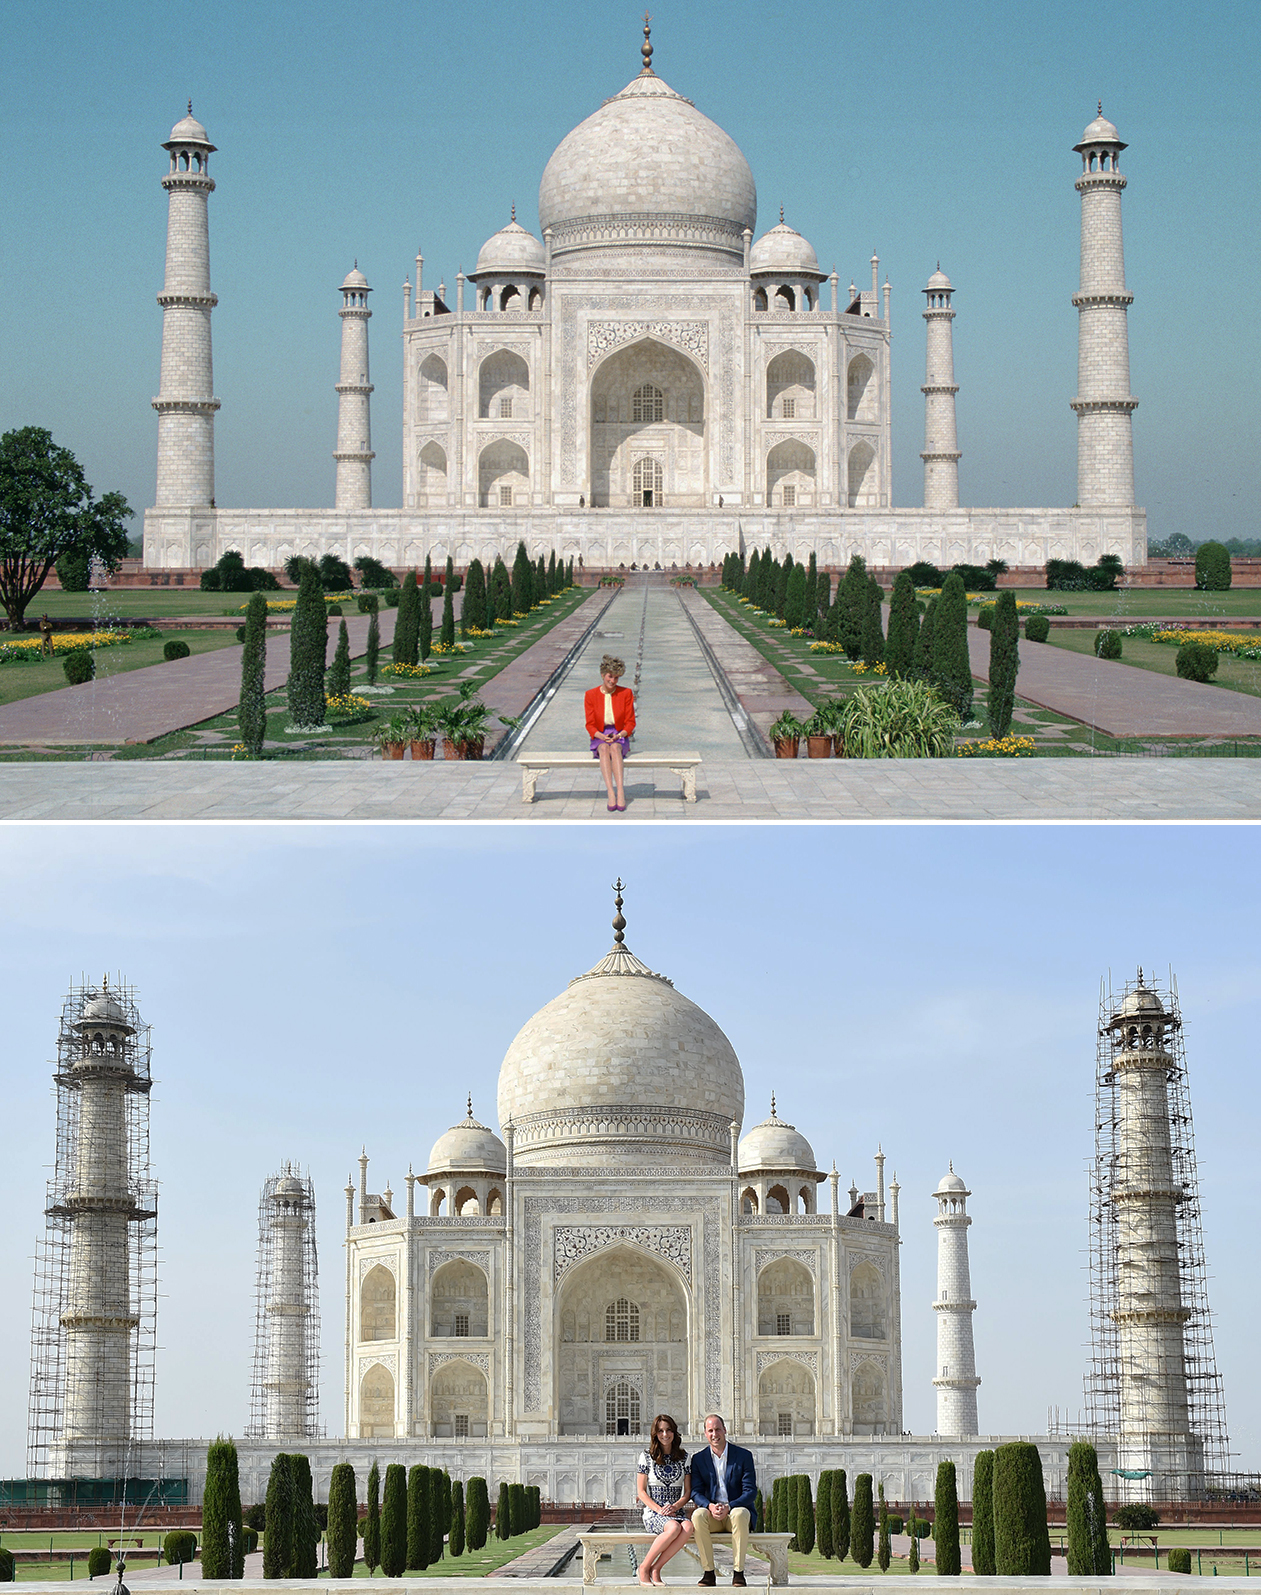 Top: Princess Diana sits in front of the Taj Mahal in Agra, India, Feb. 11, 1992. Bottom: Prince William, Duke of Cambridge, and Catherine, Duchess of Cambridge, pose at the Taj Mahal, April 16, 2016. (Tim Graham—Getty Images/Money Sharma—Pool/AFP/Getty Images)